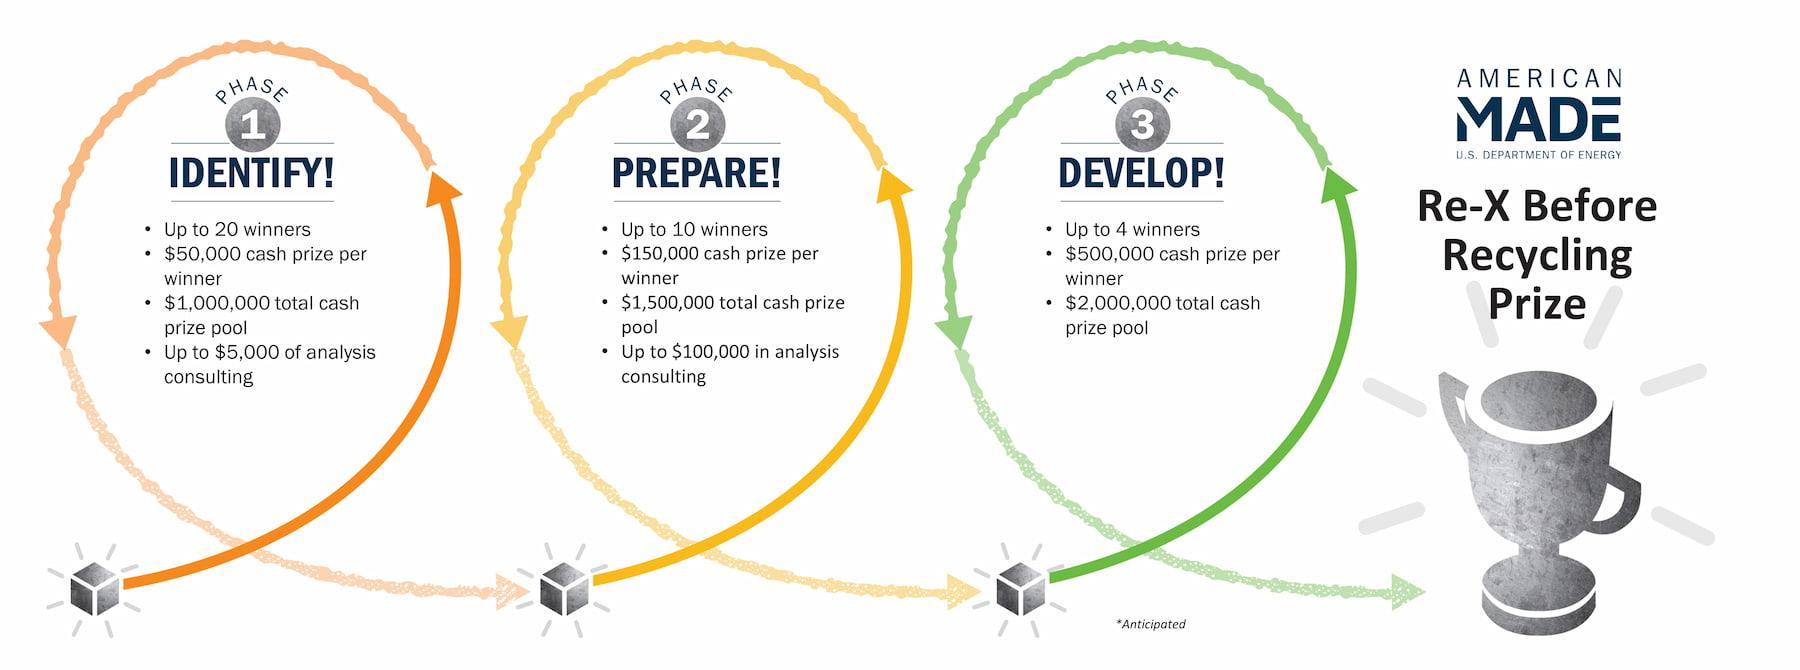 timeline of Re-X Before Recycling Prize